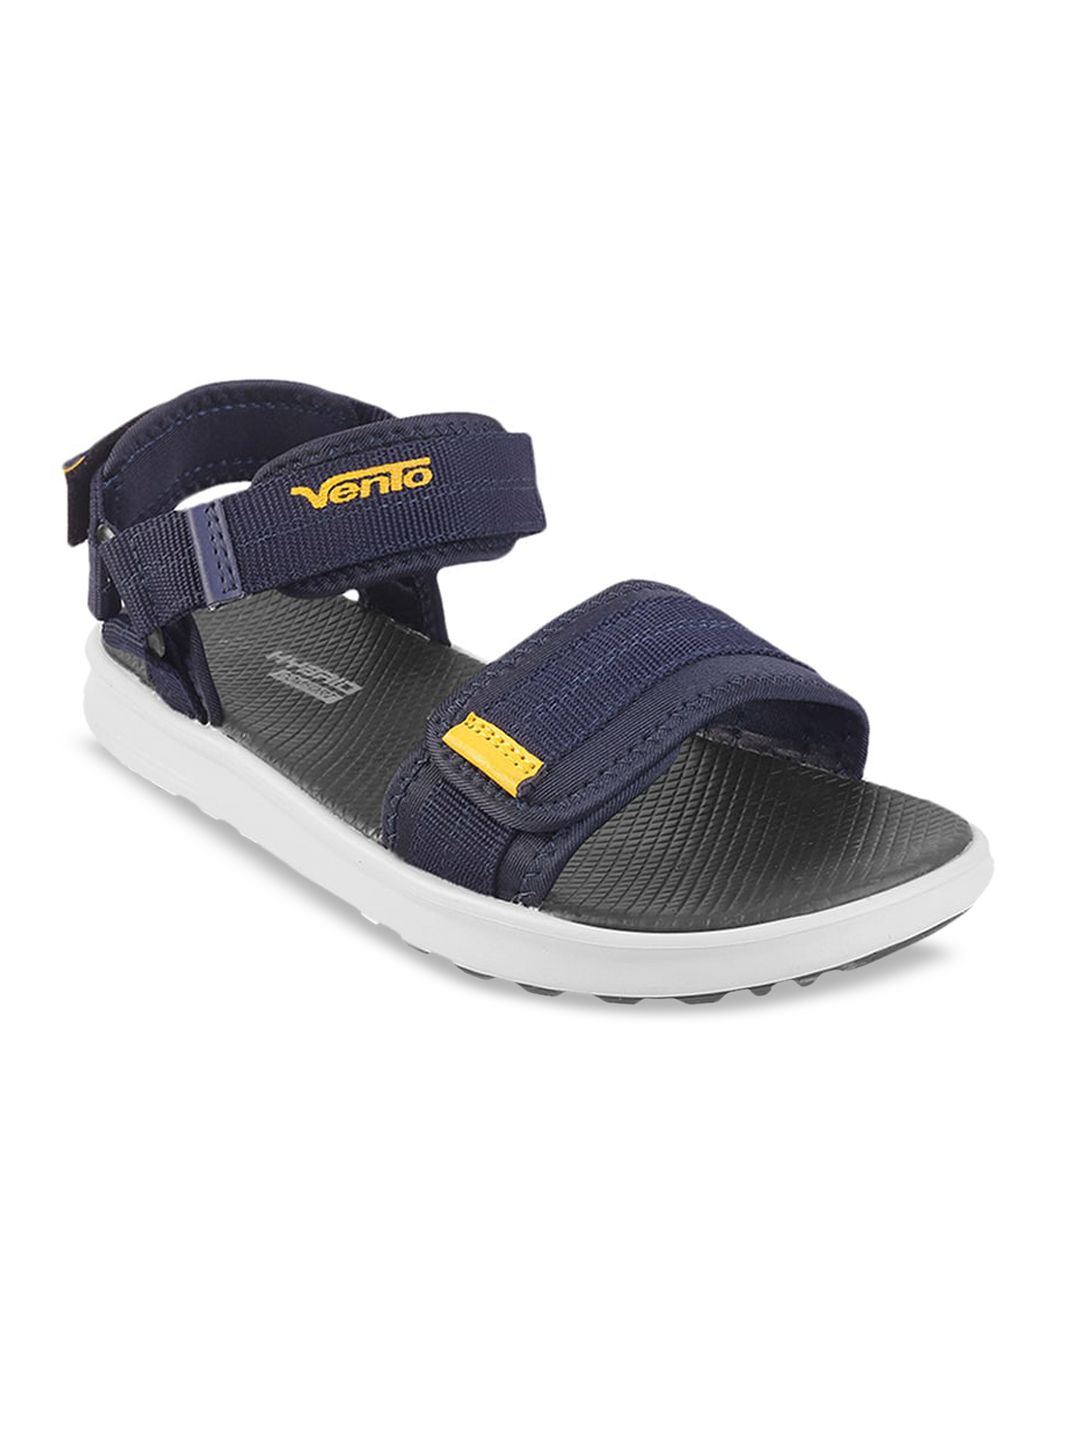 Vento Unisex Navy Blue & Yellow Solid Sports Sandal Price in India